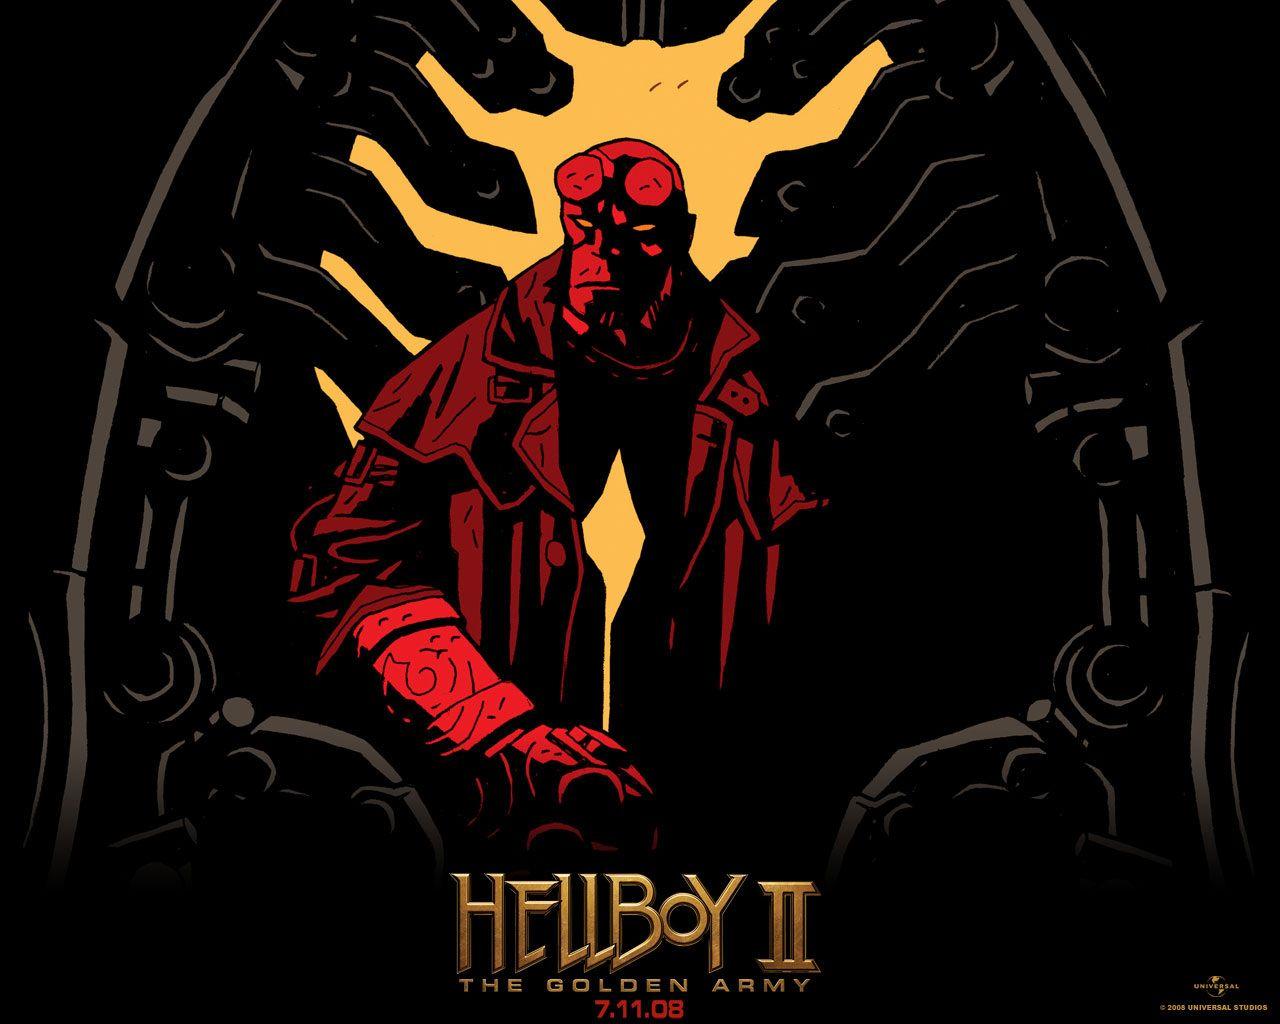 Hellboy II: The Golden Army Wallpaper - 1280x1024